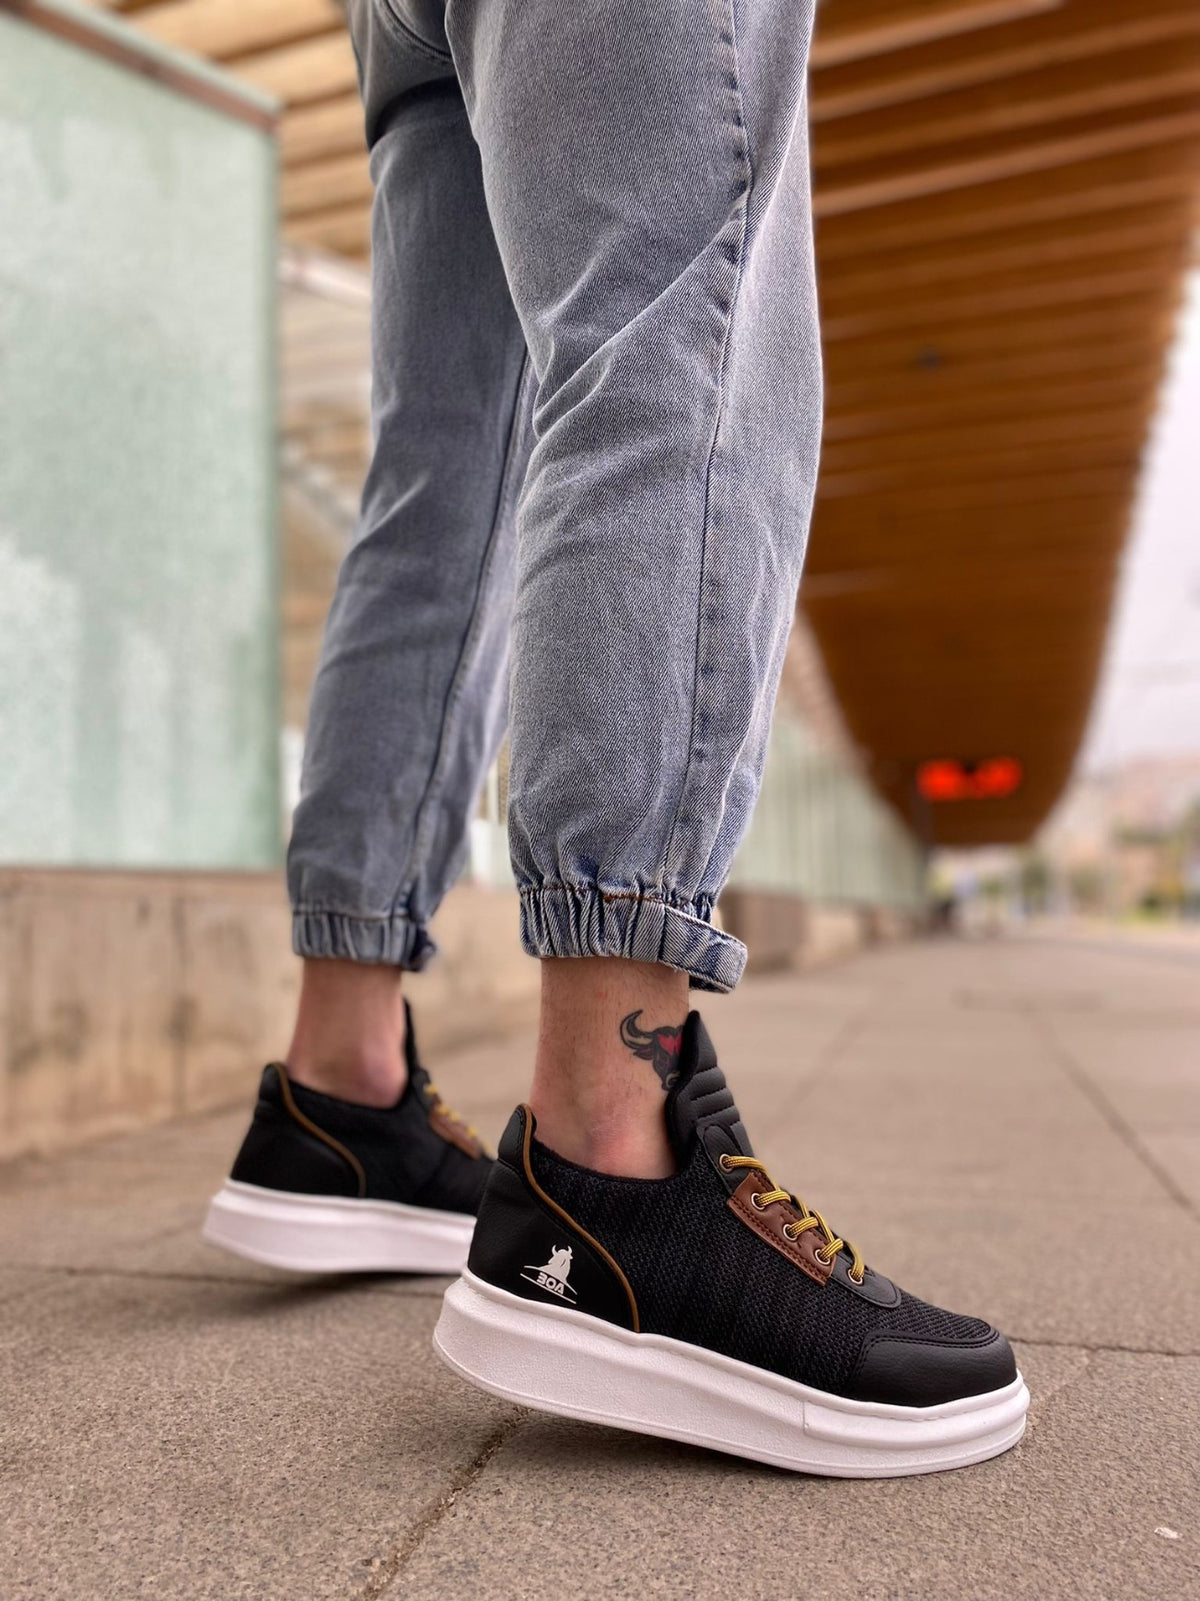 BA0606 Lace-up Comfortable High Sole Black Patterned Casual Men's Sneakers - STREETMODE™